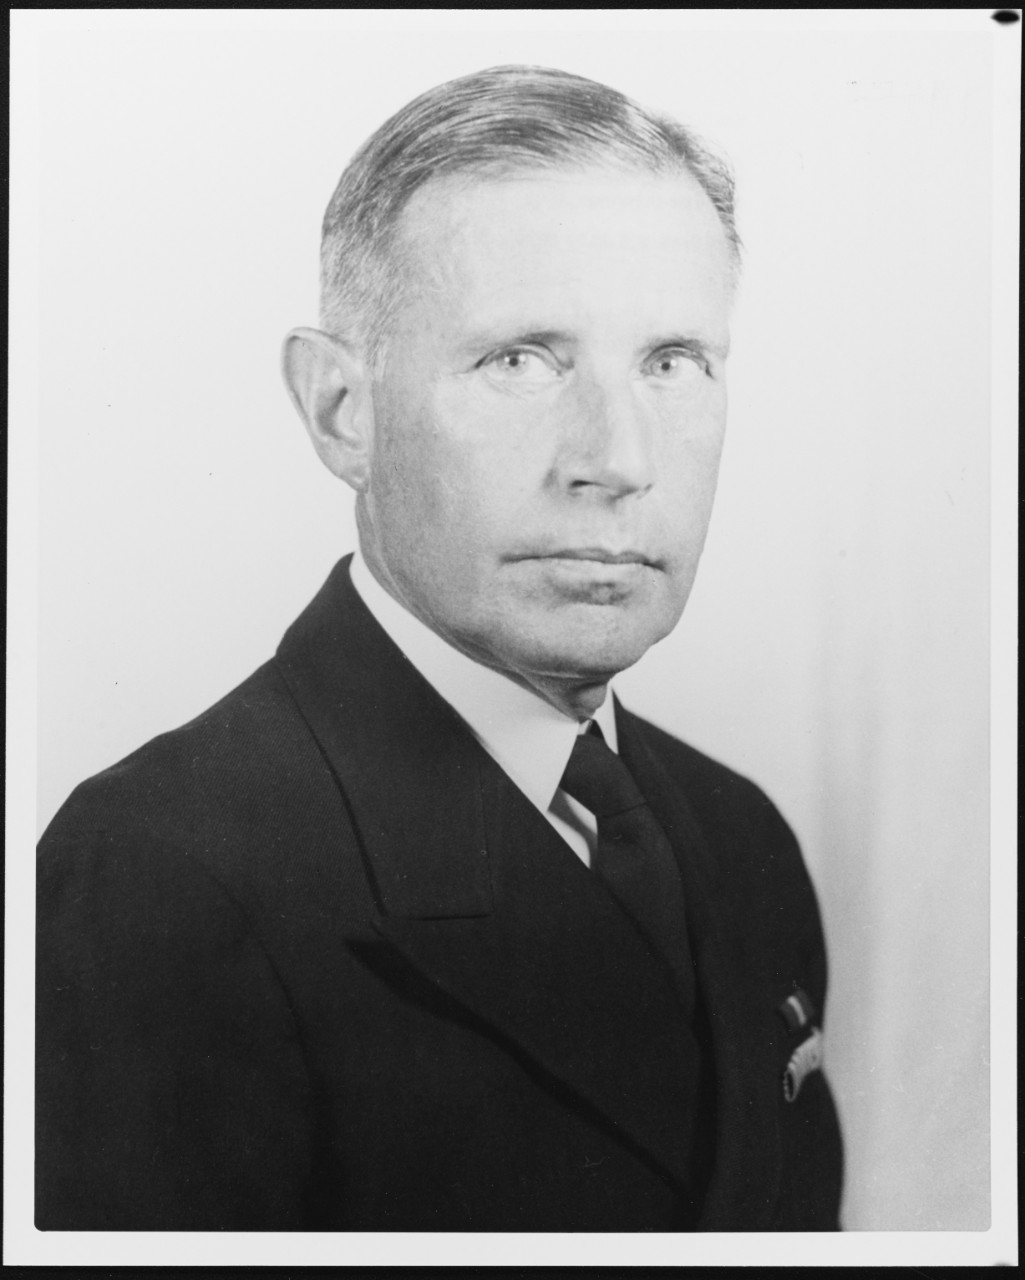 Photographic portrait of Rear Admiral Raymond A. Spruance, USN, 1943